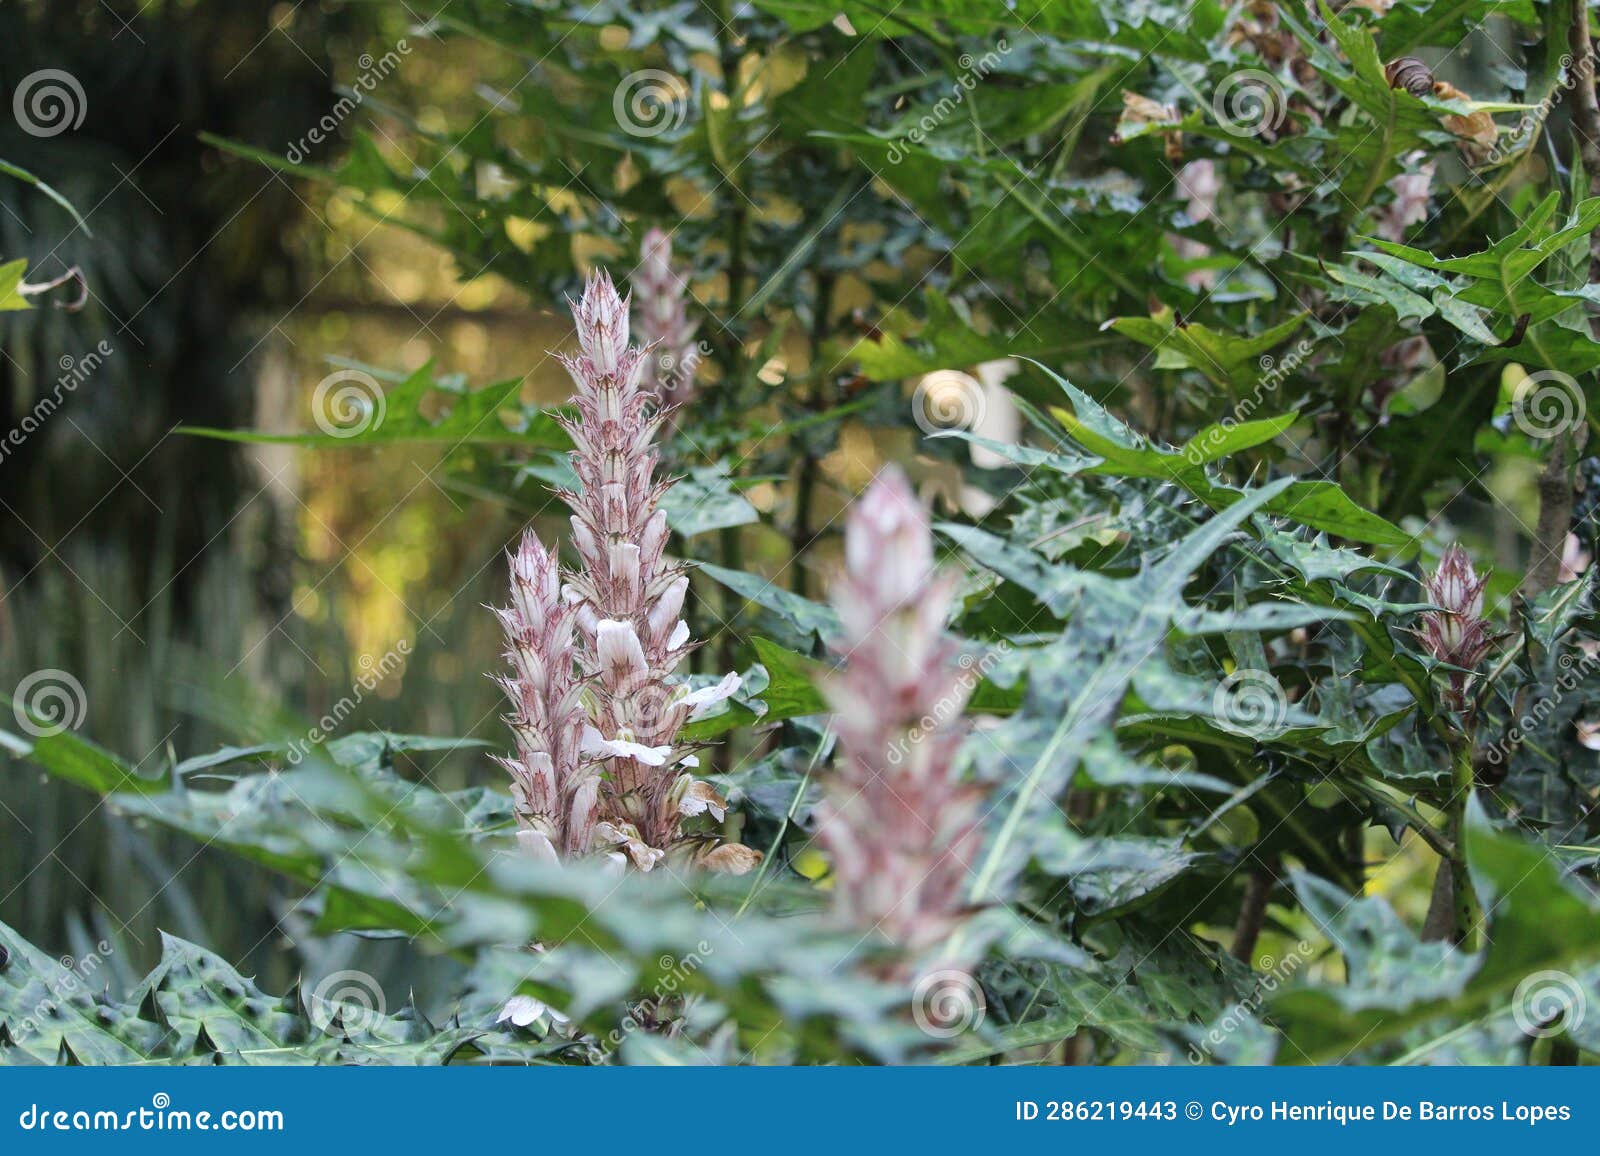 mountain thistle, bear's breech, acanthus montanus, african species, introduced ornamental species